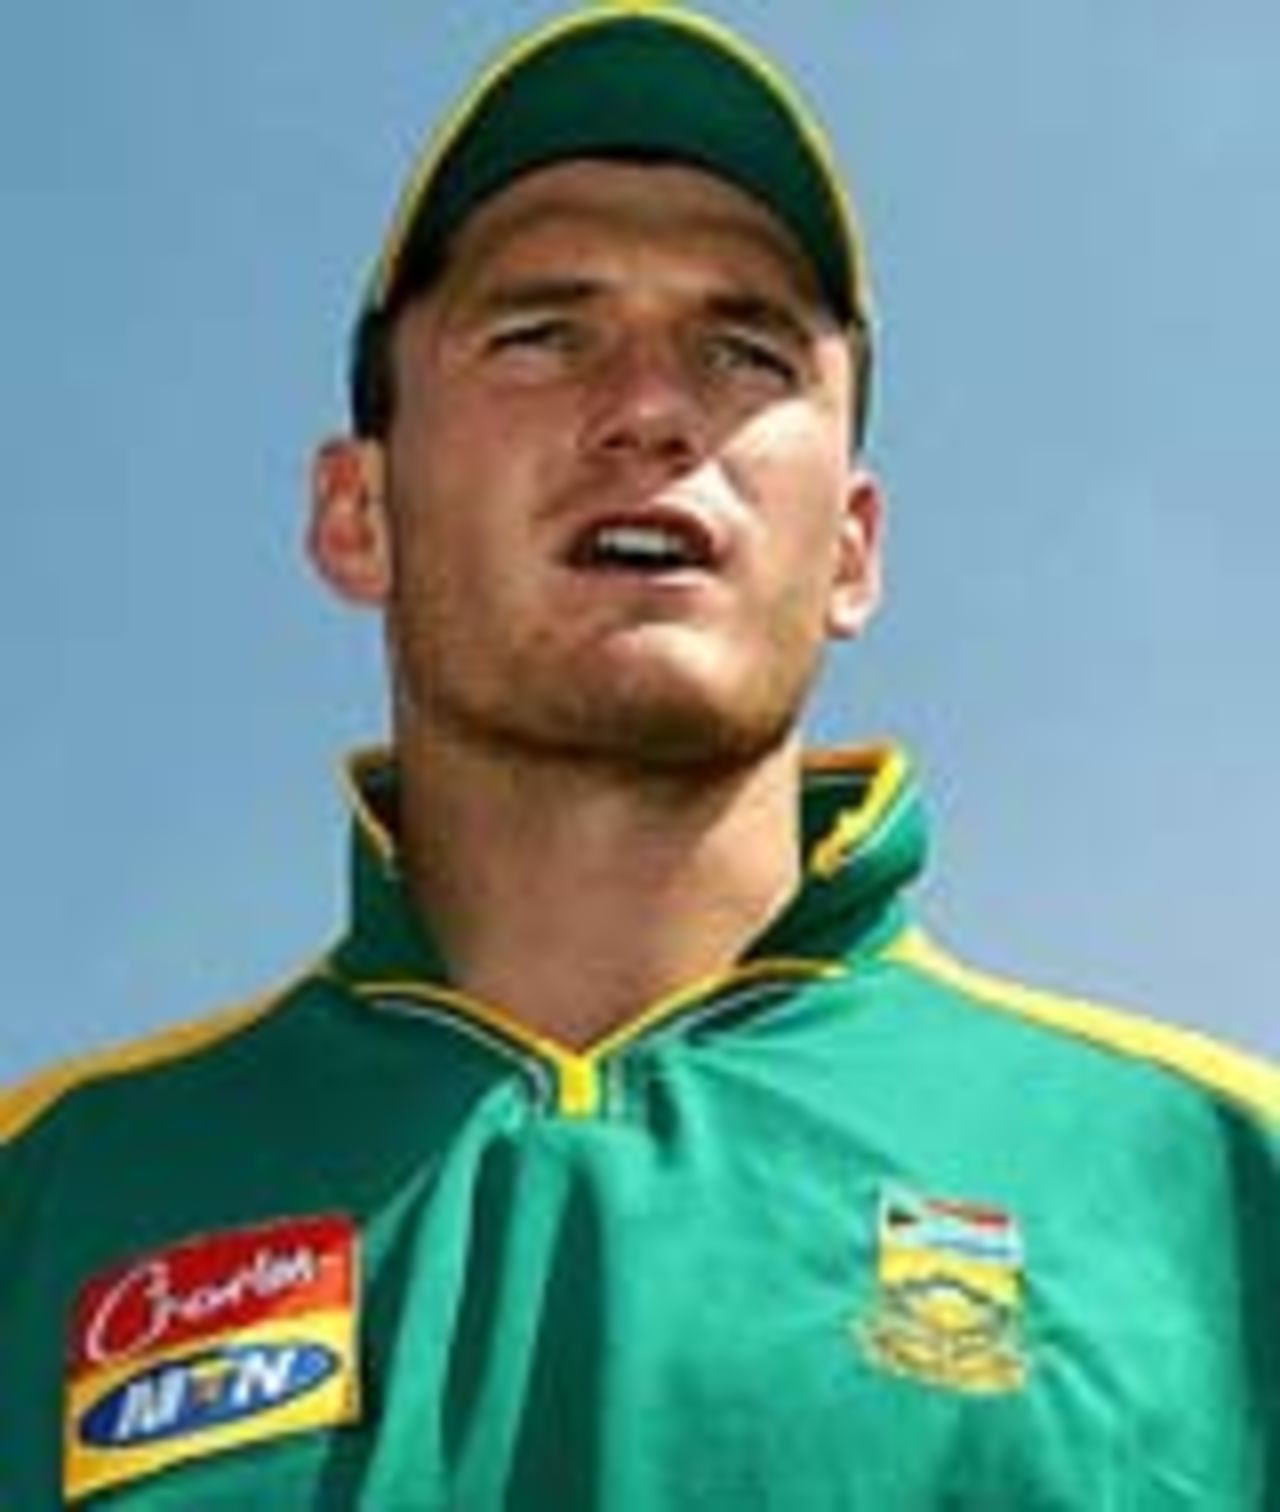 Graeme Smith addresses a press conference at Faisalabad, October 23, 2003